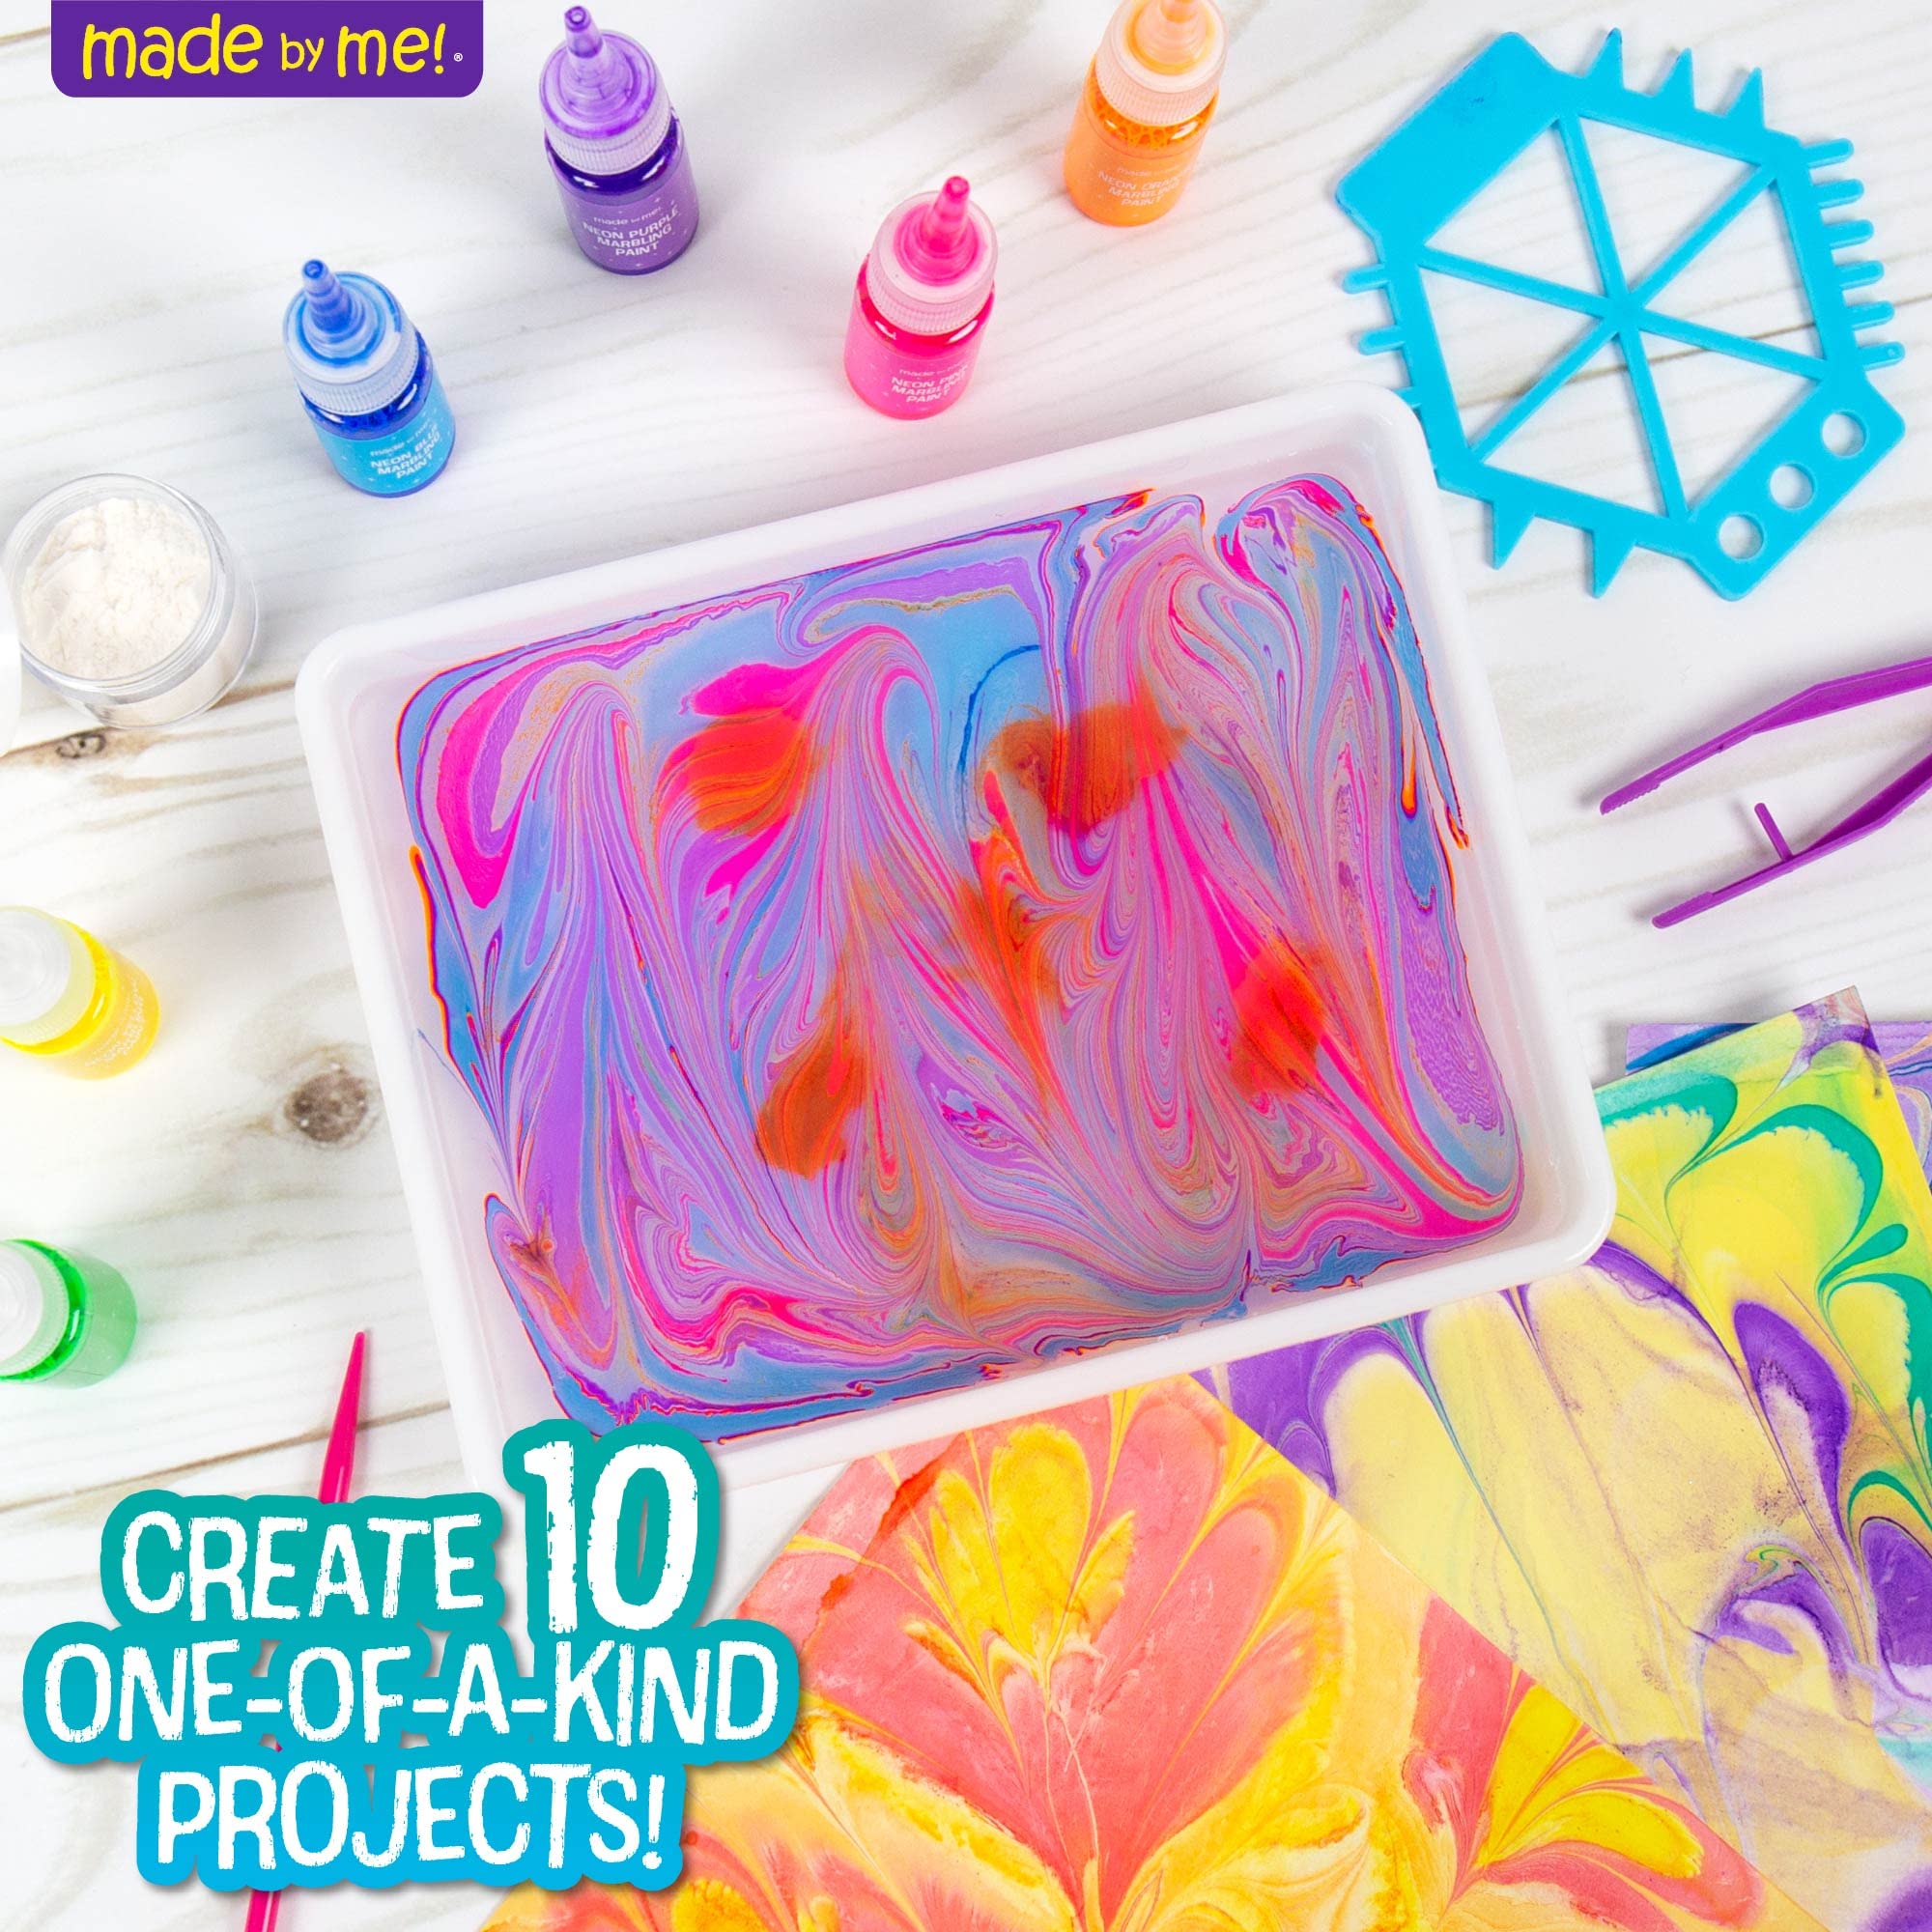 Made By Me Marbling Paint Studio, 25-Piece Marbling Kit for Kids, Make 10 Pour Paint Art Projects, Dip & Paint Marbling Arts & Crafts Kits for Kids, Less Mess Pour Paint for Ages 6, 7, 8 & 9, Fun Gift